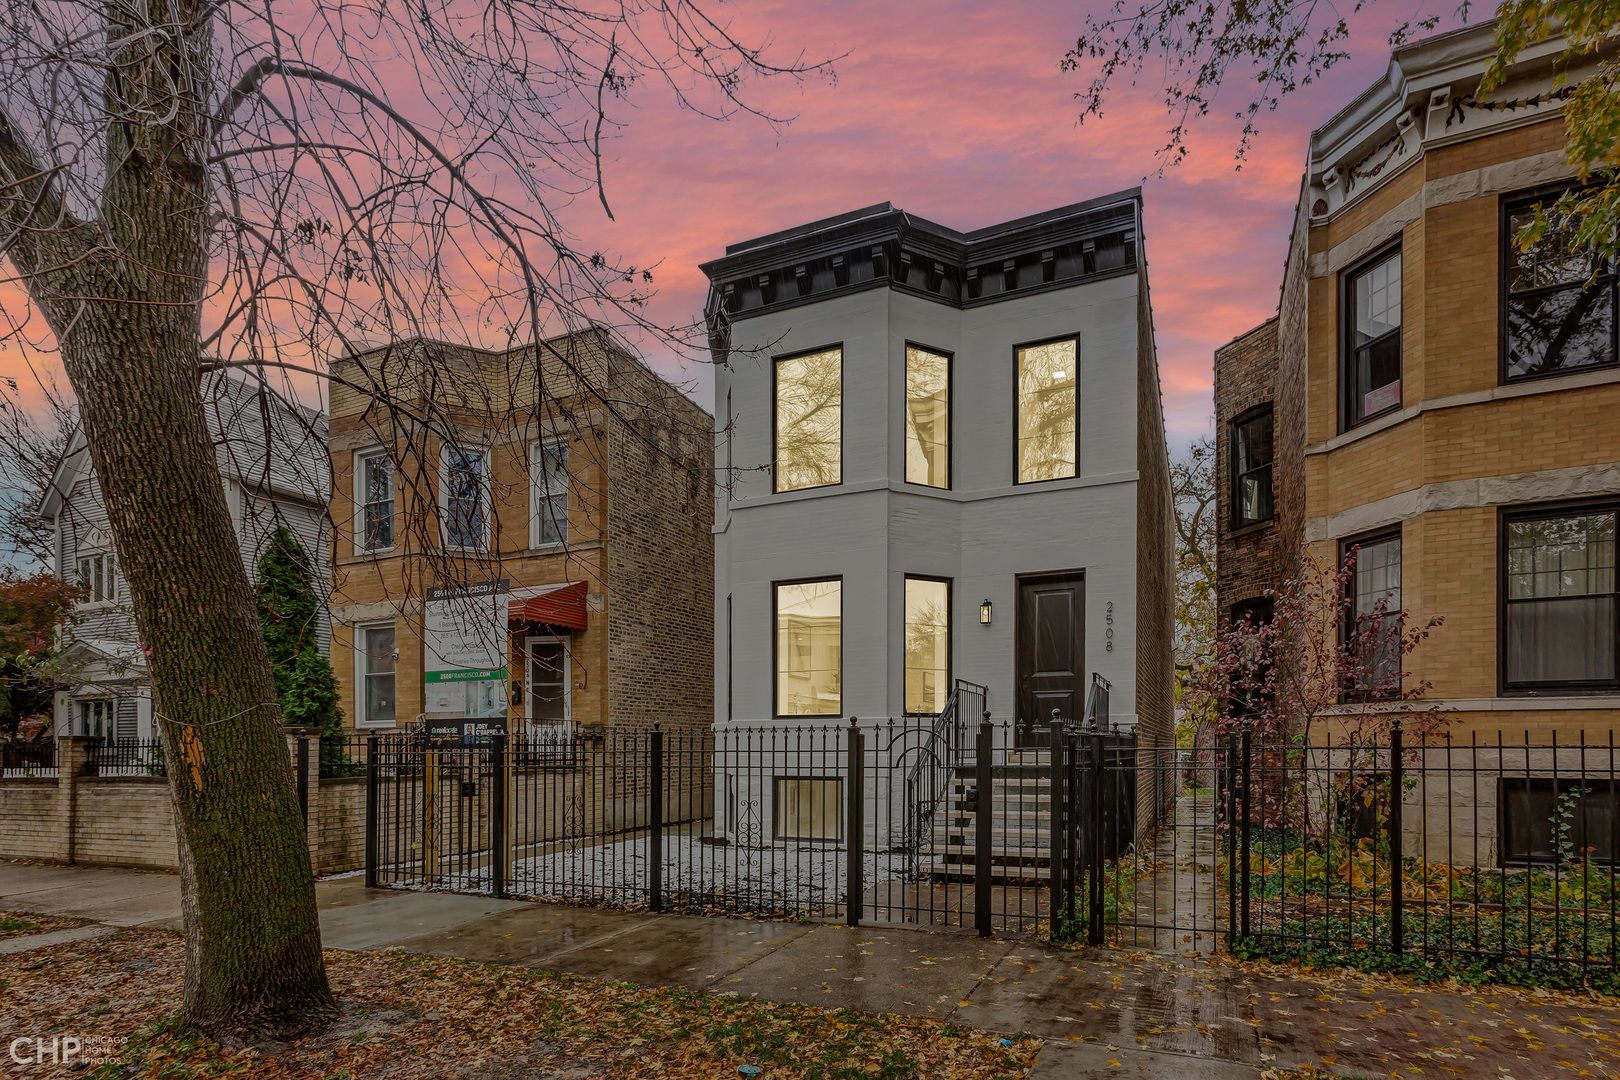 Main Photo: 2508 N Francisco Avenue in Chicago: CHI - Logan Square Residential for sale ()  : MLS®# 11688858